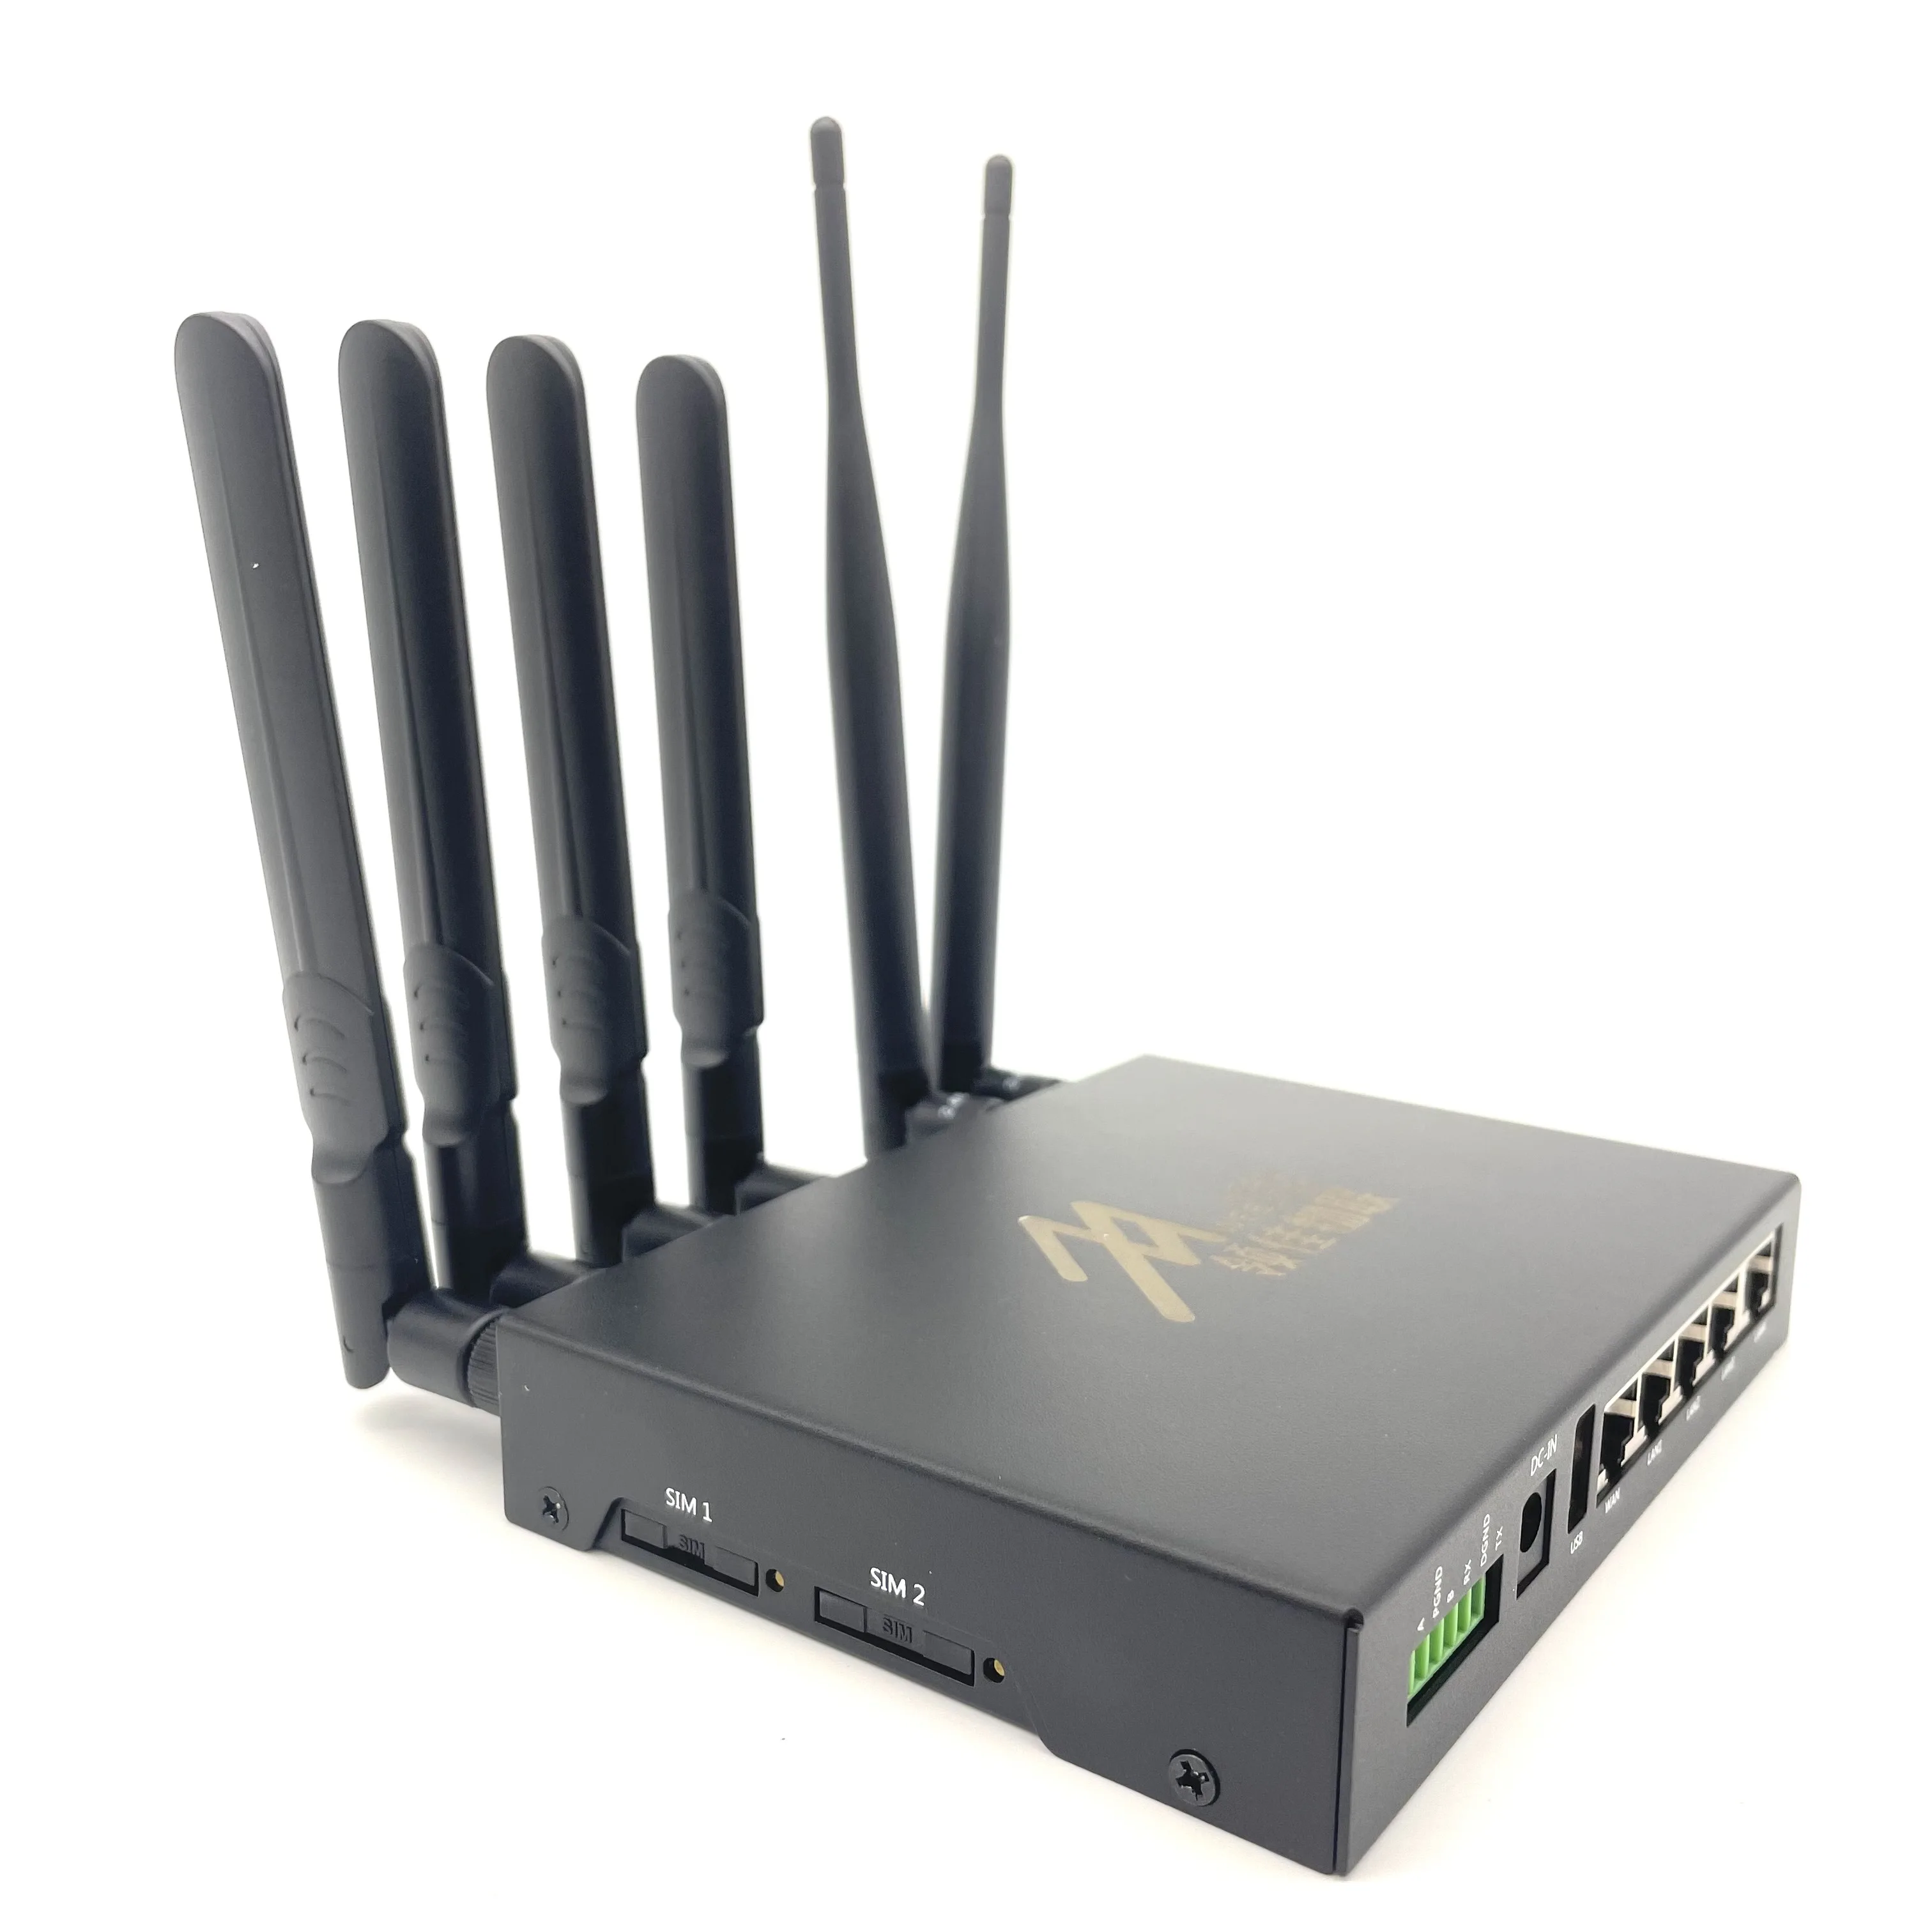 5G Industrial Wireless Router Support Dual SIM Card and 2.4G/5.8g Frequency WIFI router